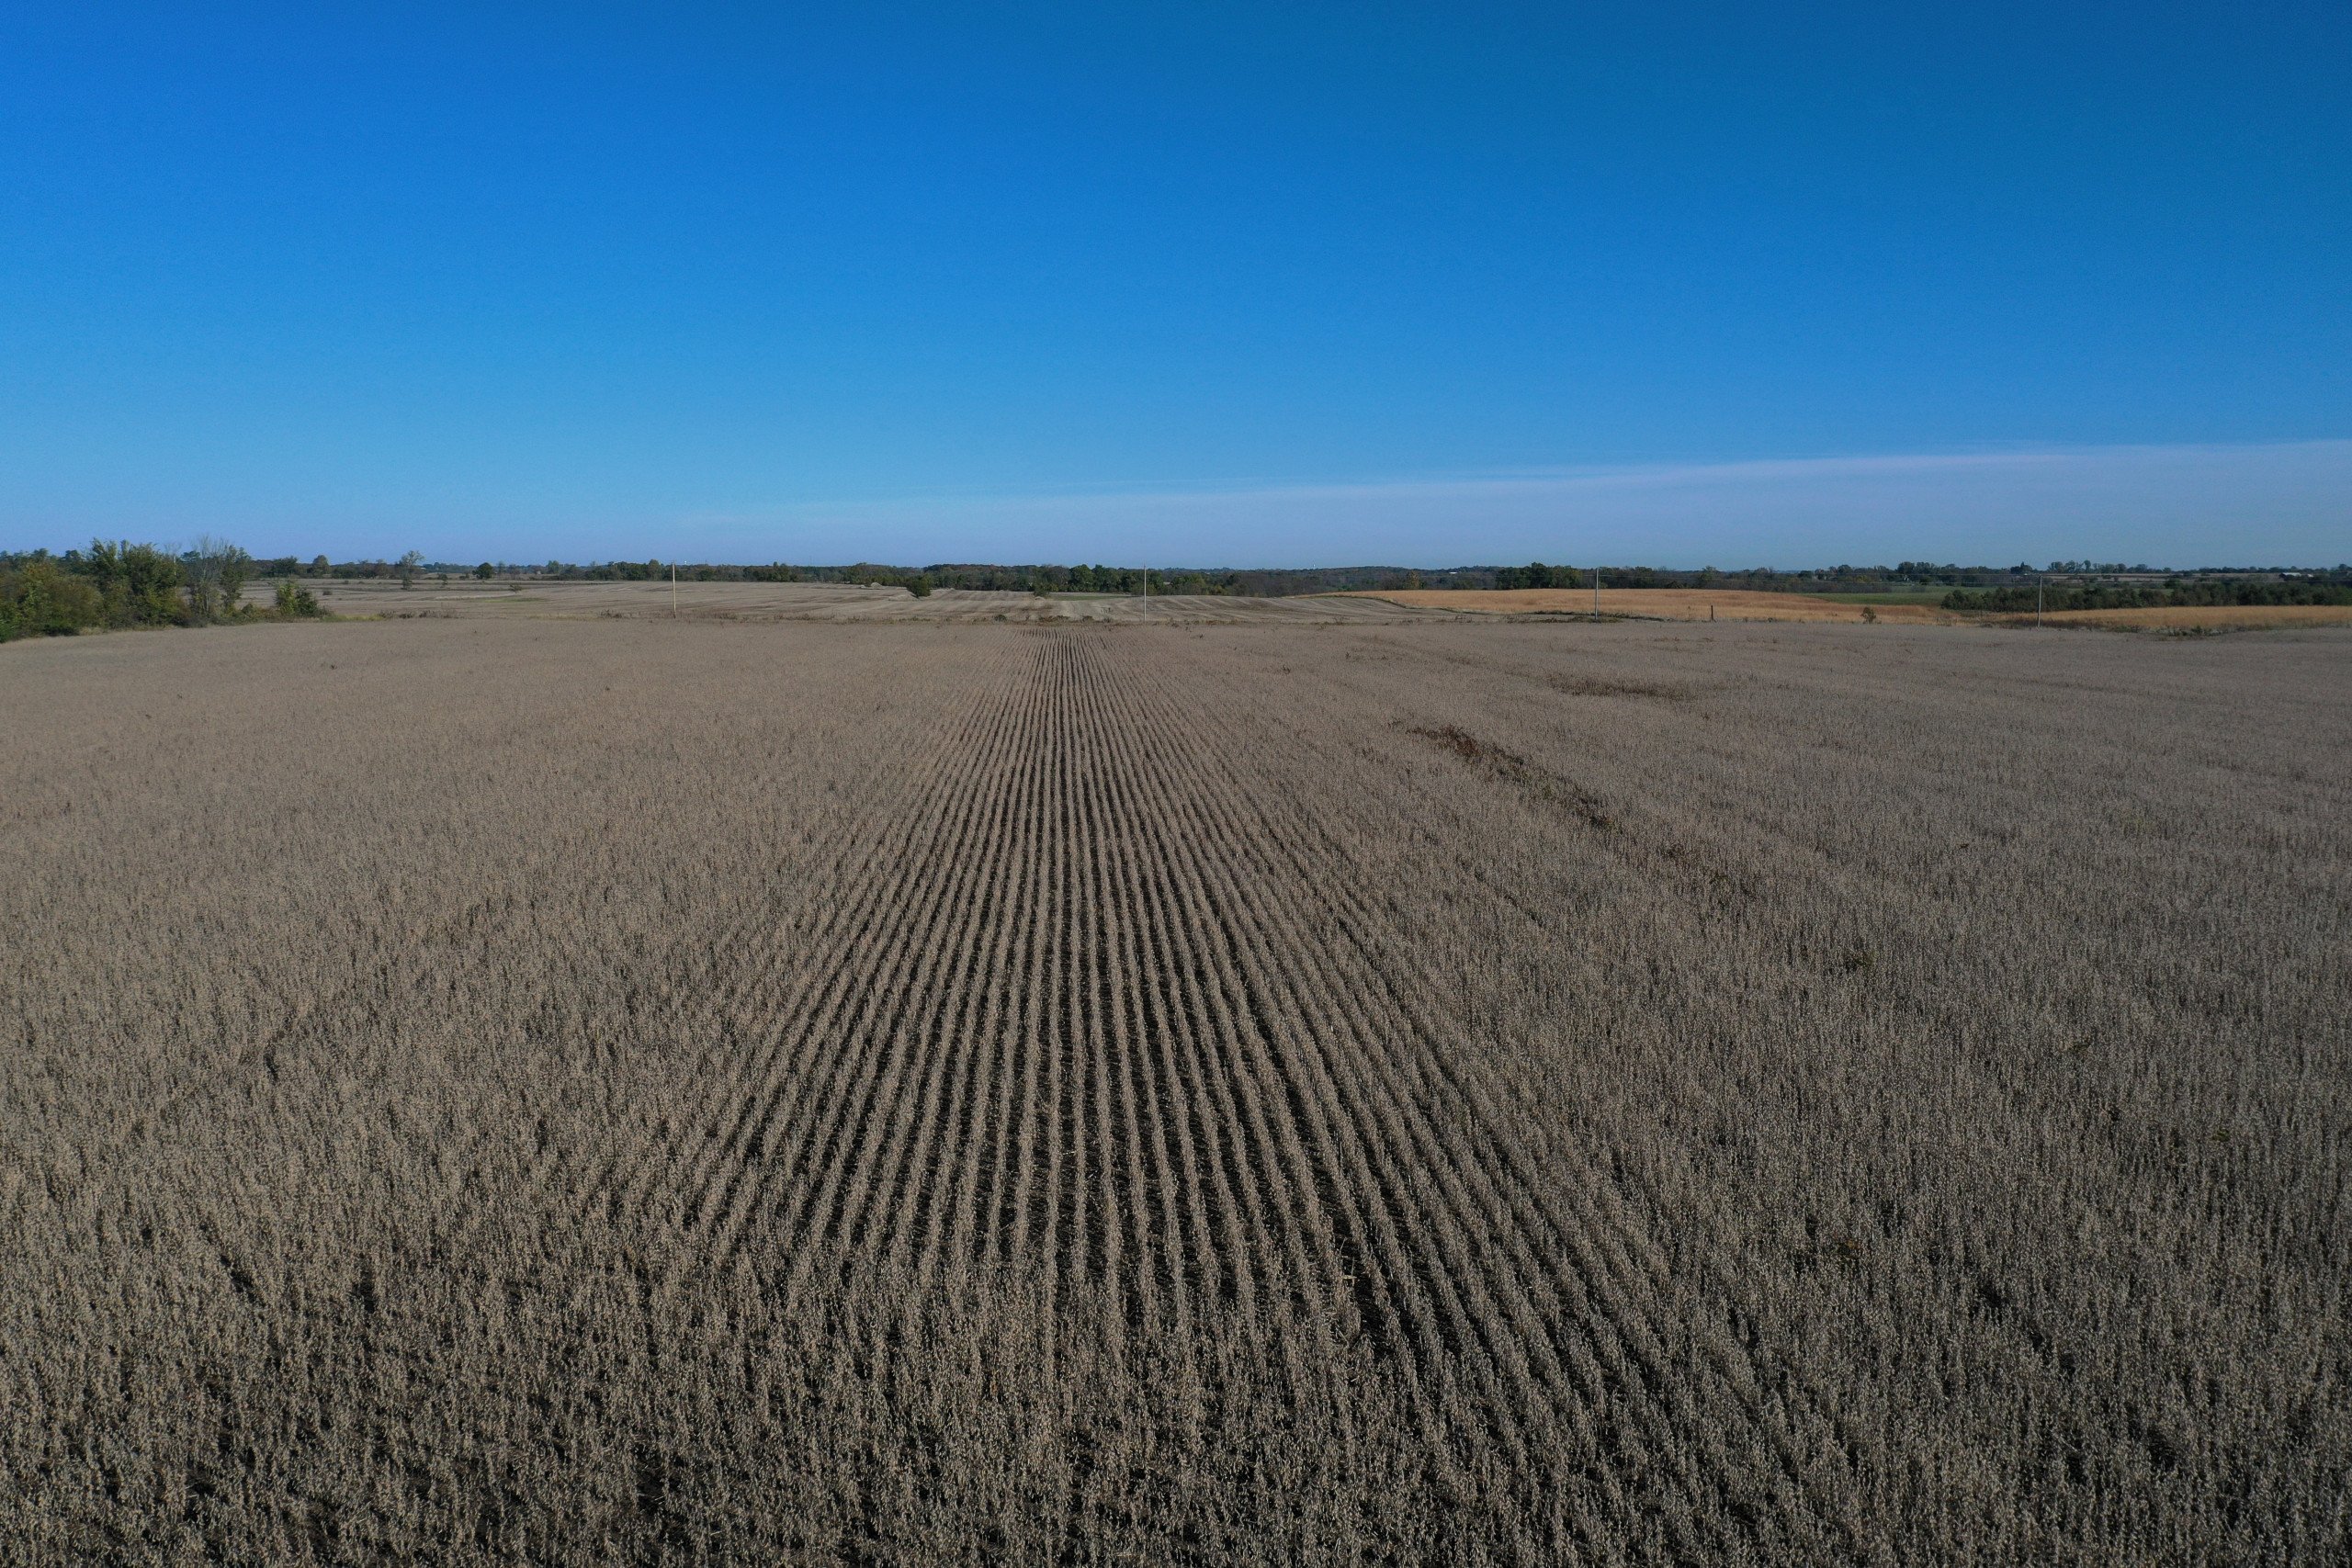 5-560th-st-and-280th-ave-williamson-50272-DJI_0749-3.jpg